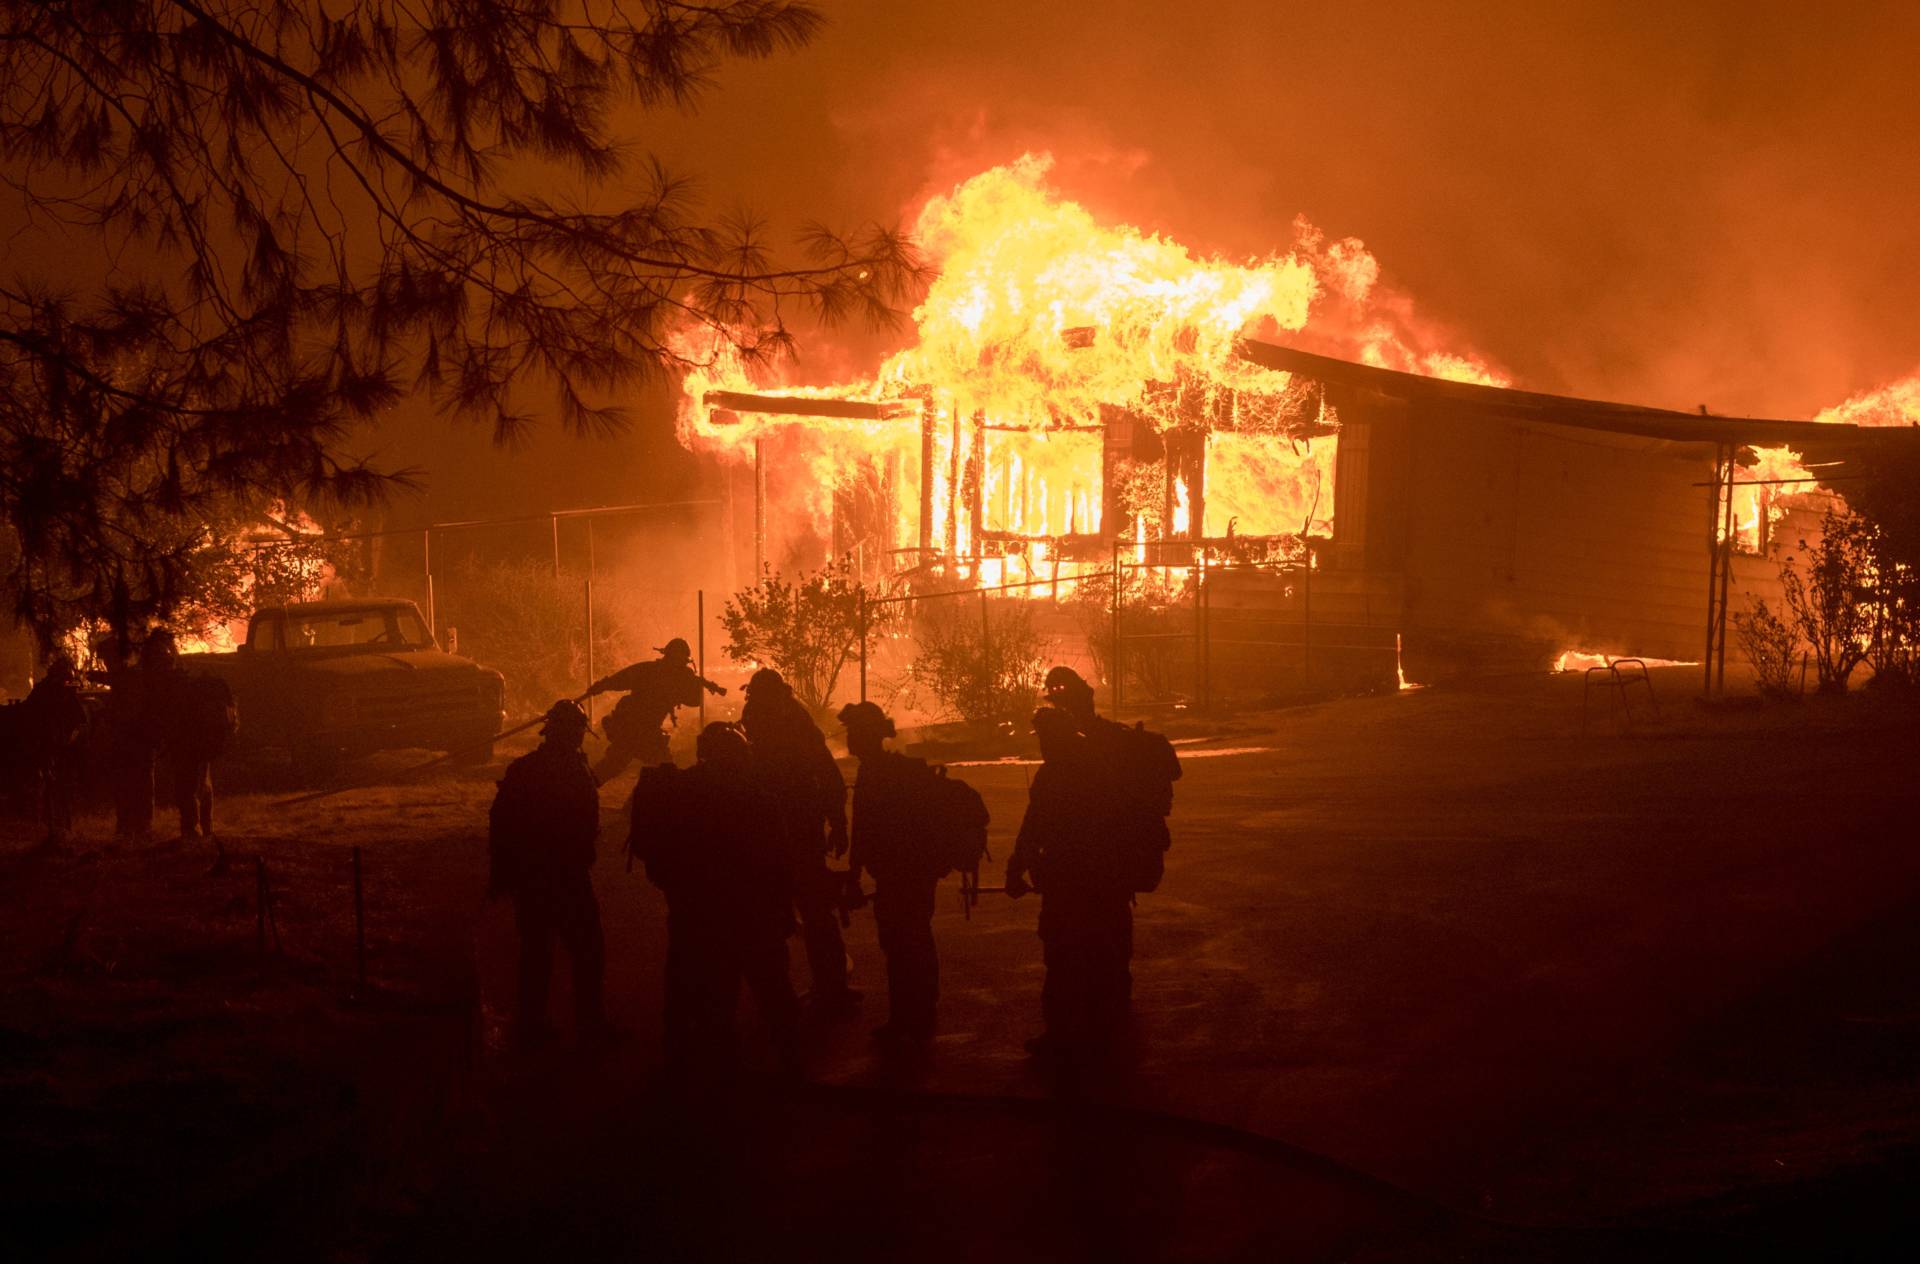 A firefighter carries a hose as a house burns Saturday night east of Oroville. The home was one of 17 structures destroyed by the Wall Fire, which broke out in rural Butte County on Friday. Josh Edelson/AFP-GettyImages